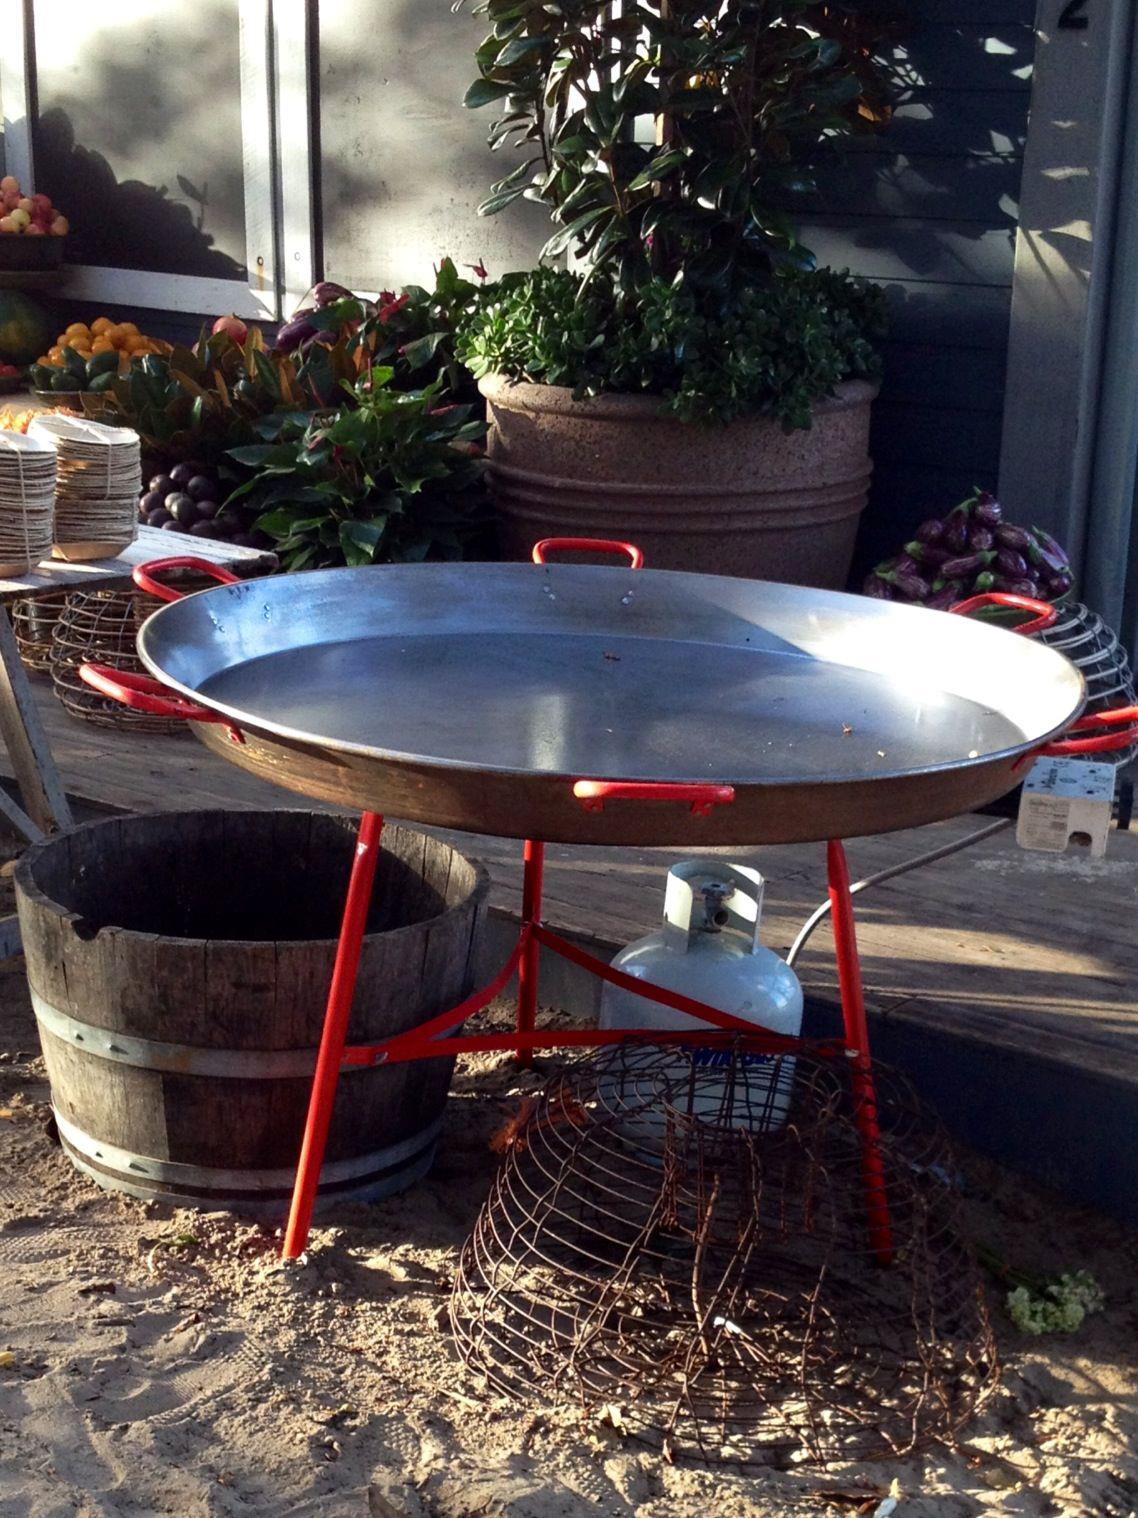 Paella Pan Hire in Northern Beaches